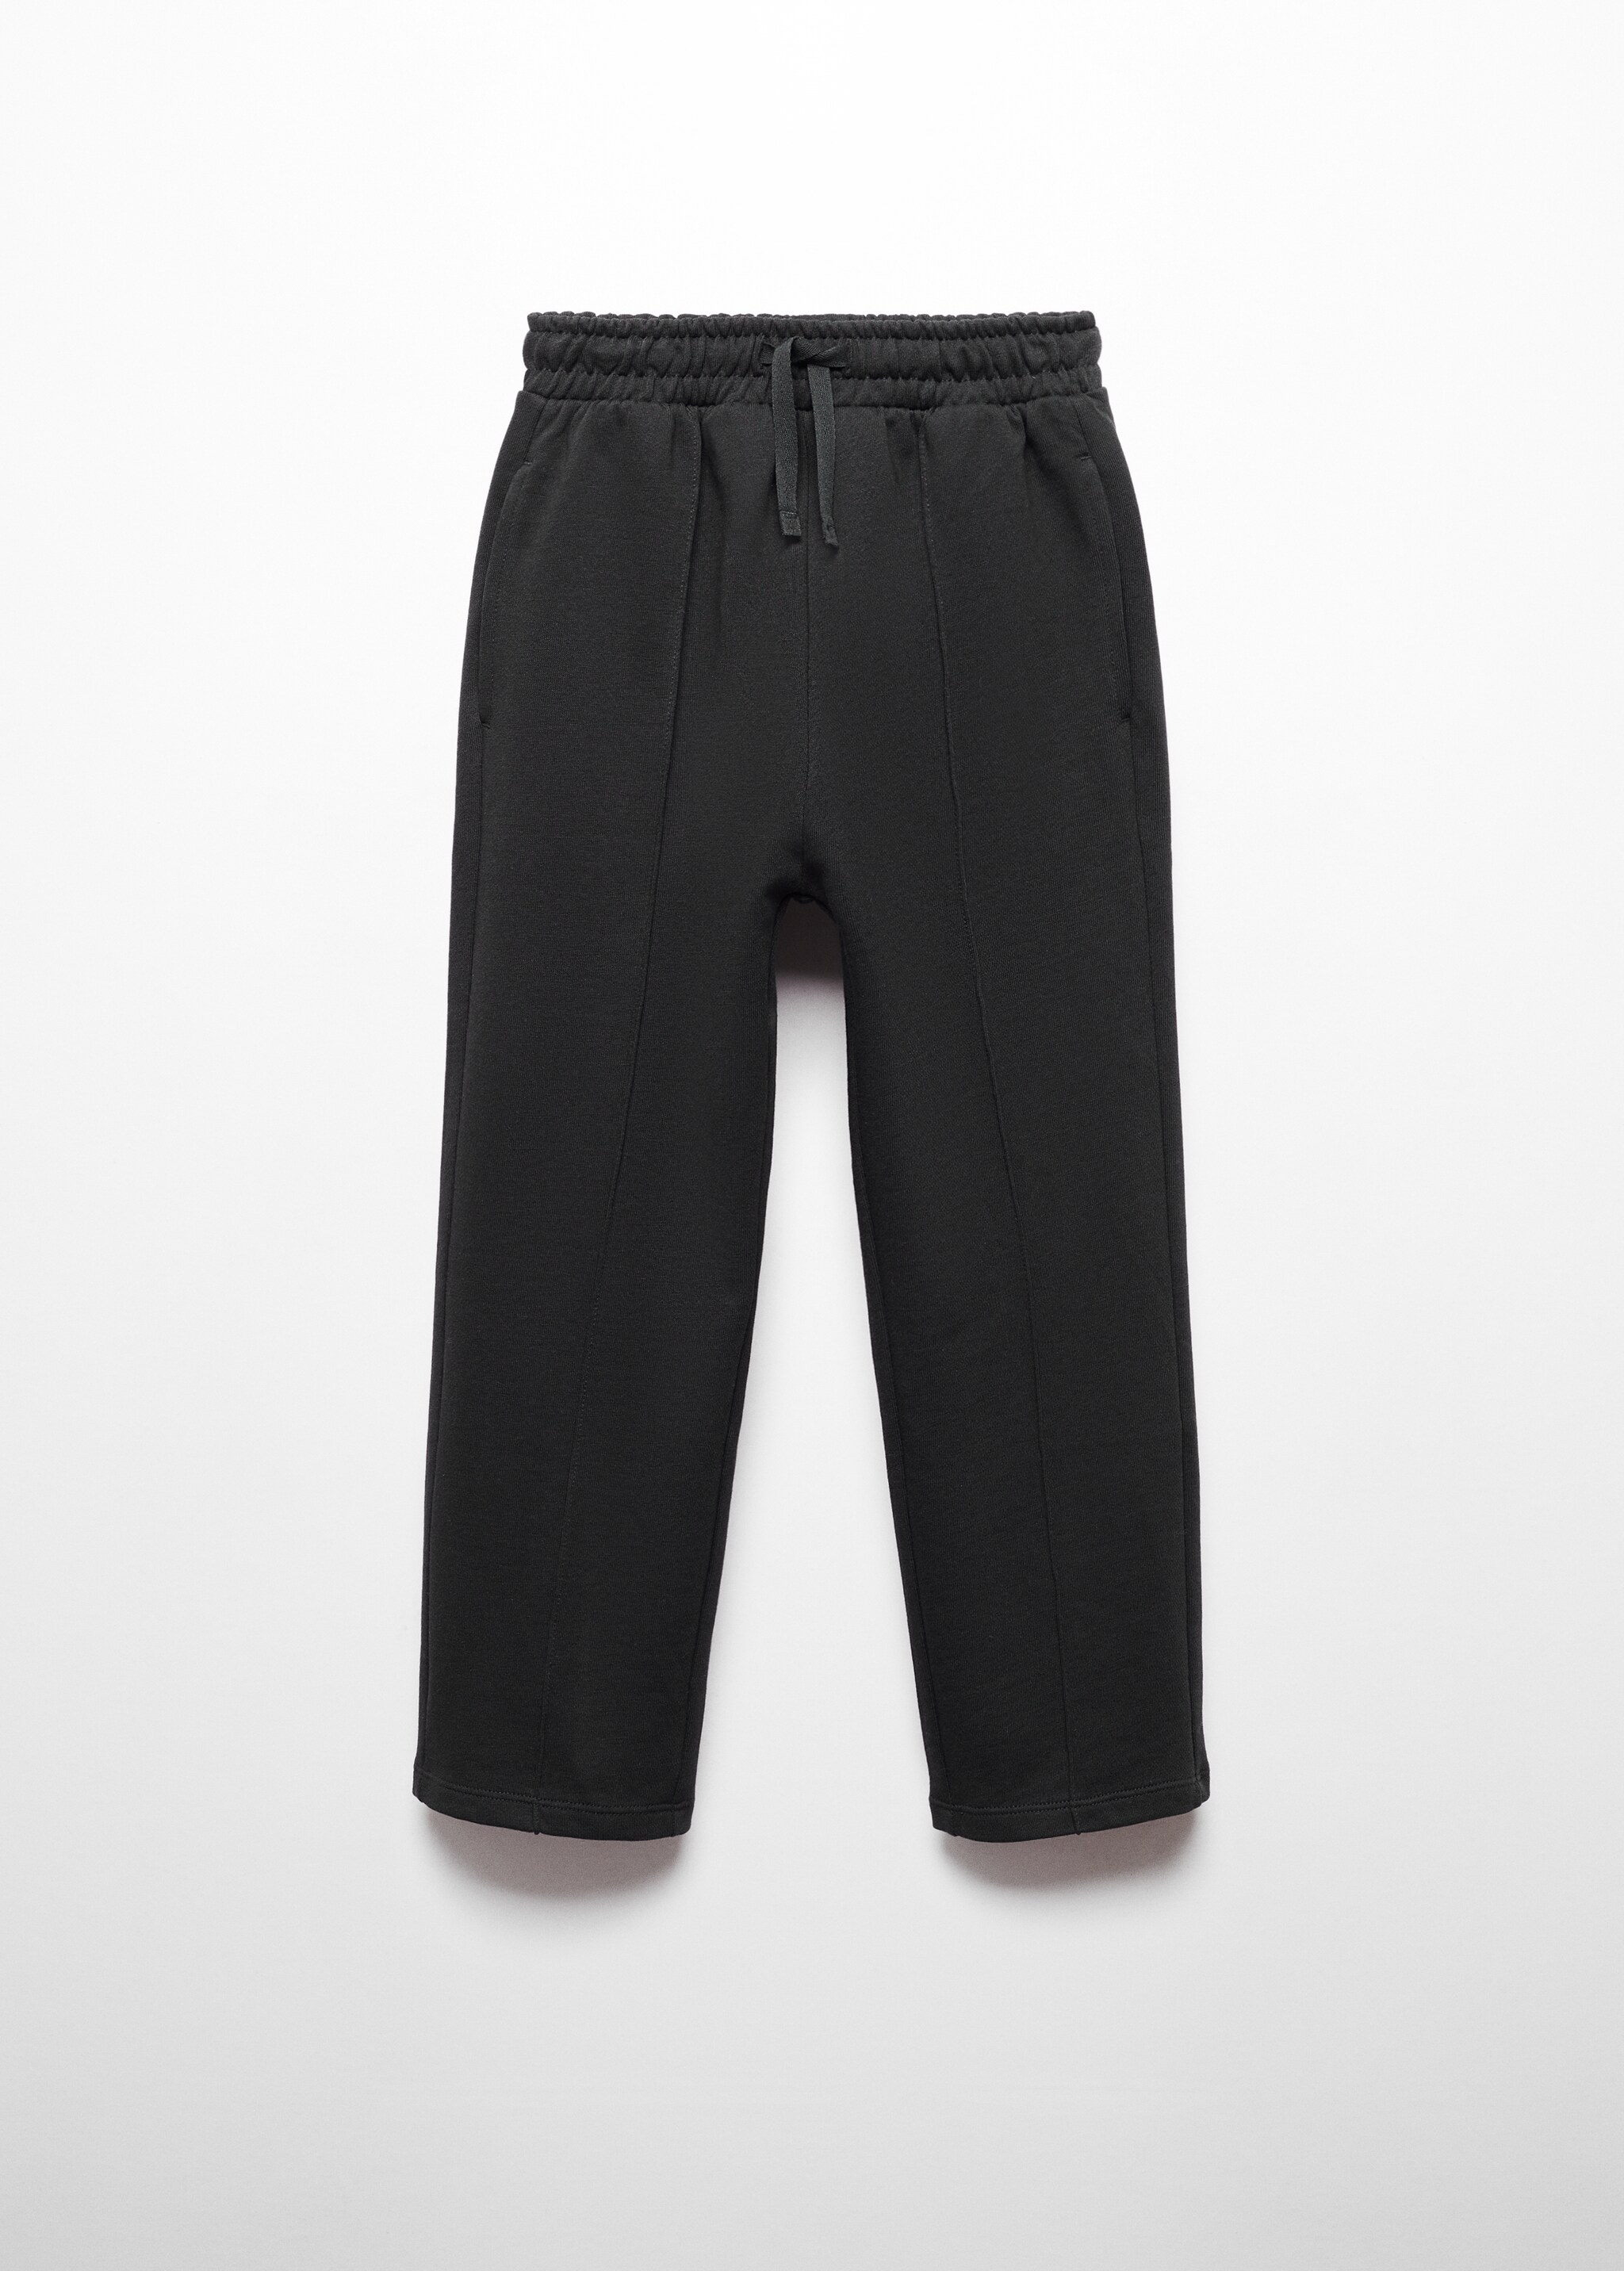 Elastic waist cotton trousers - Article without model